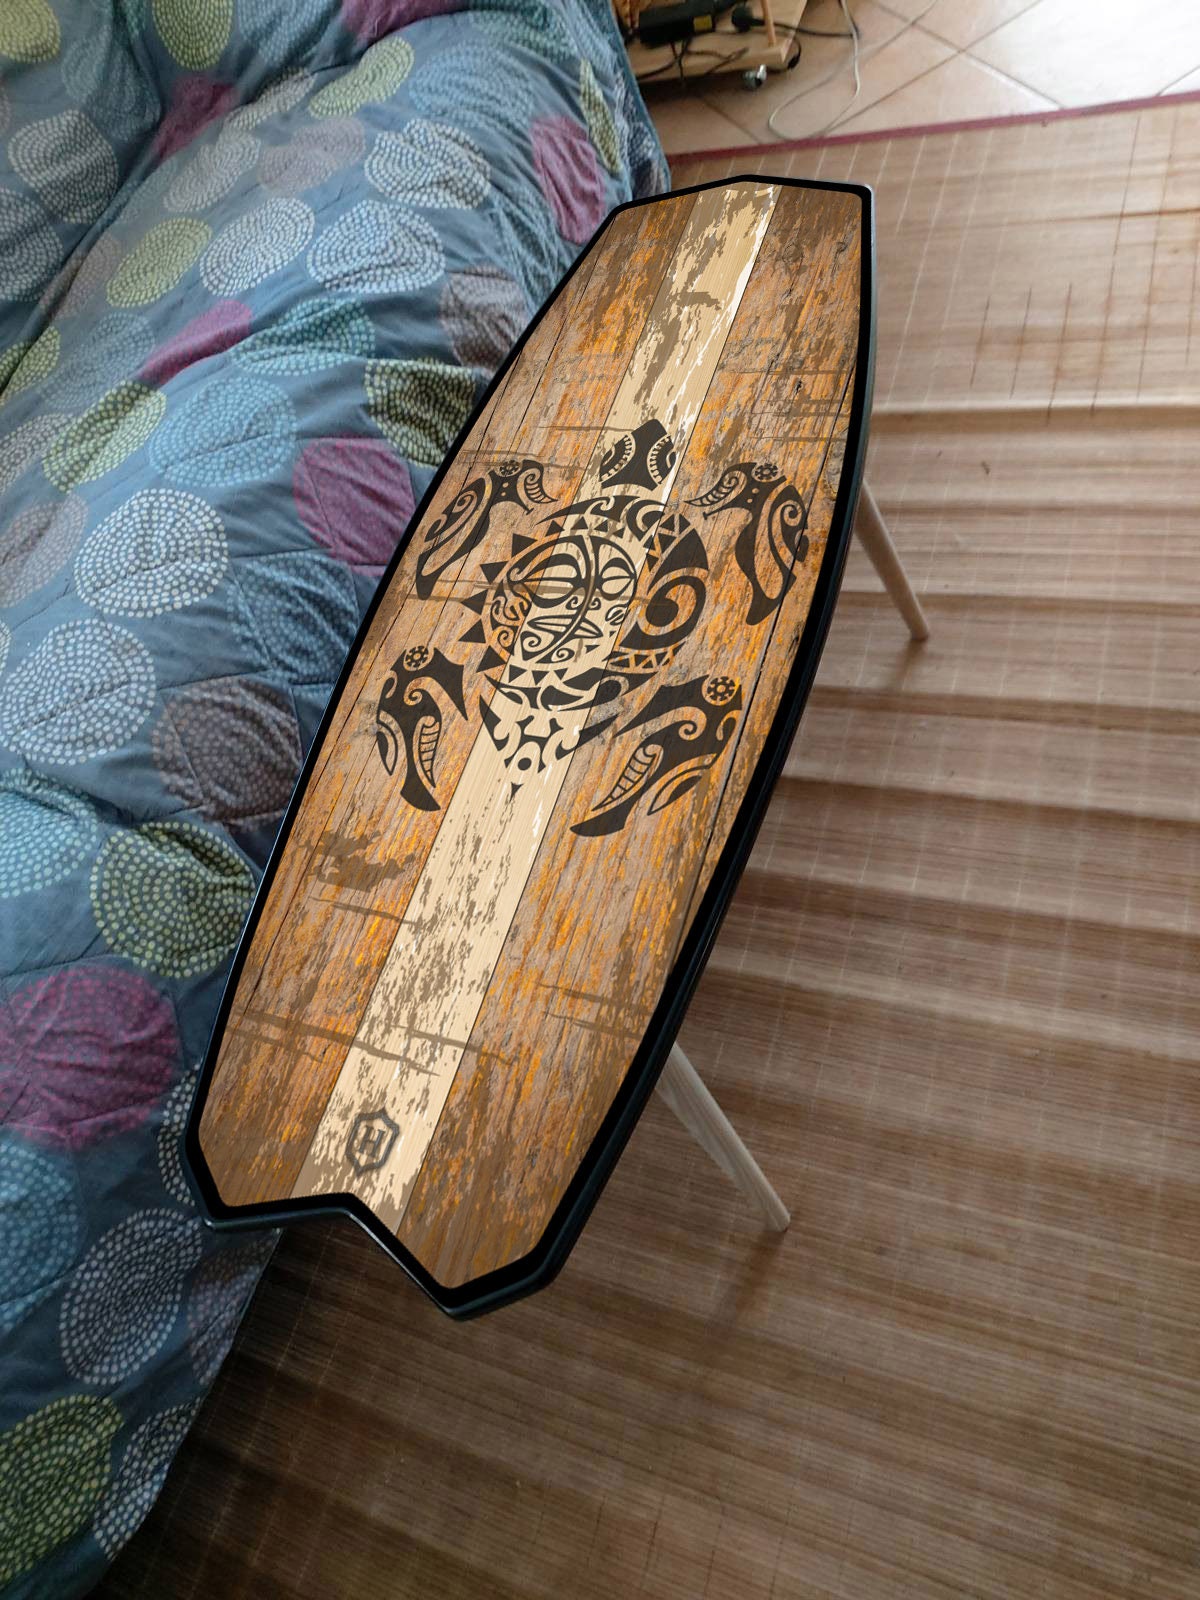 Surfboard Table with Turtle - Surfing gift in Bar Decor